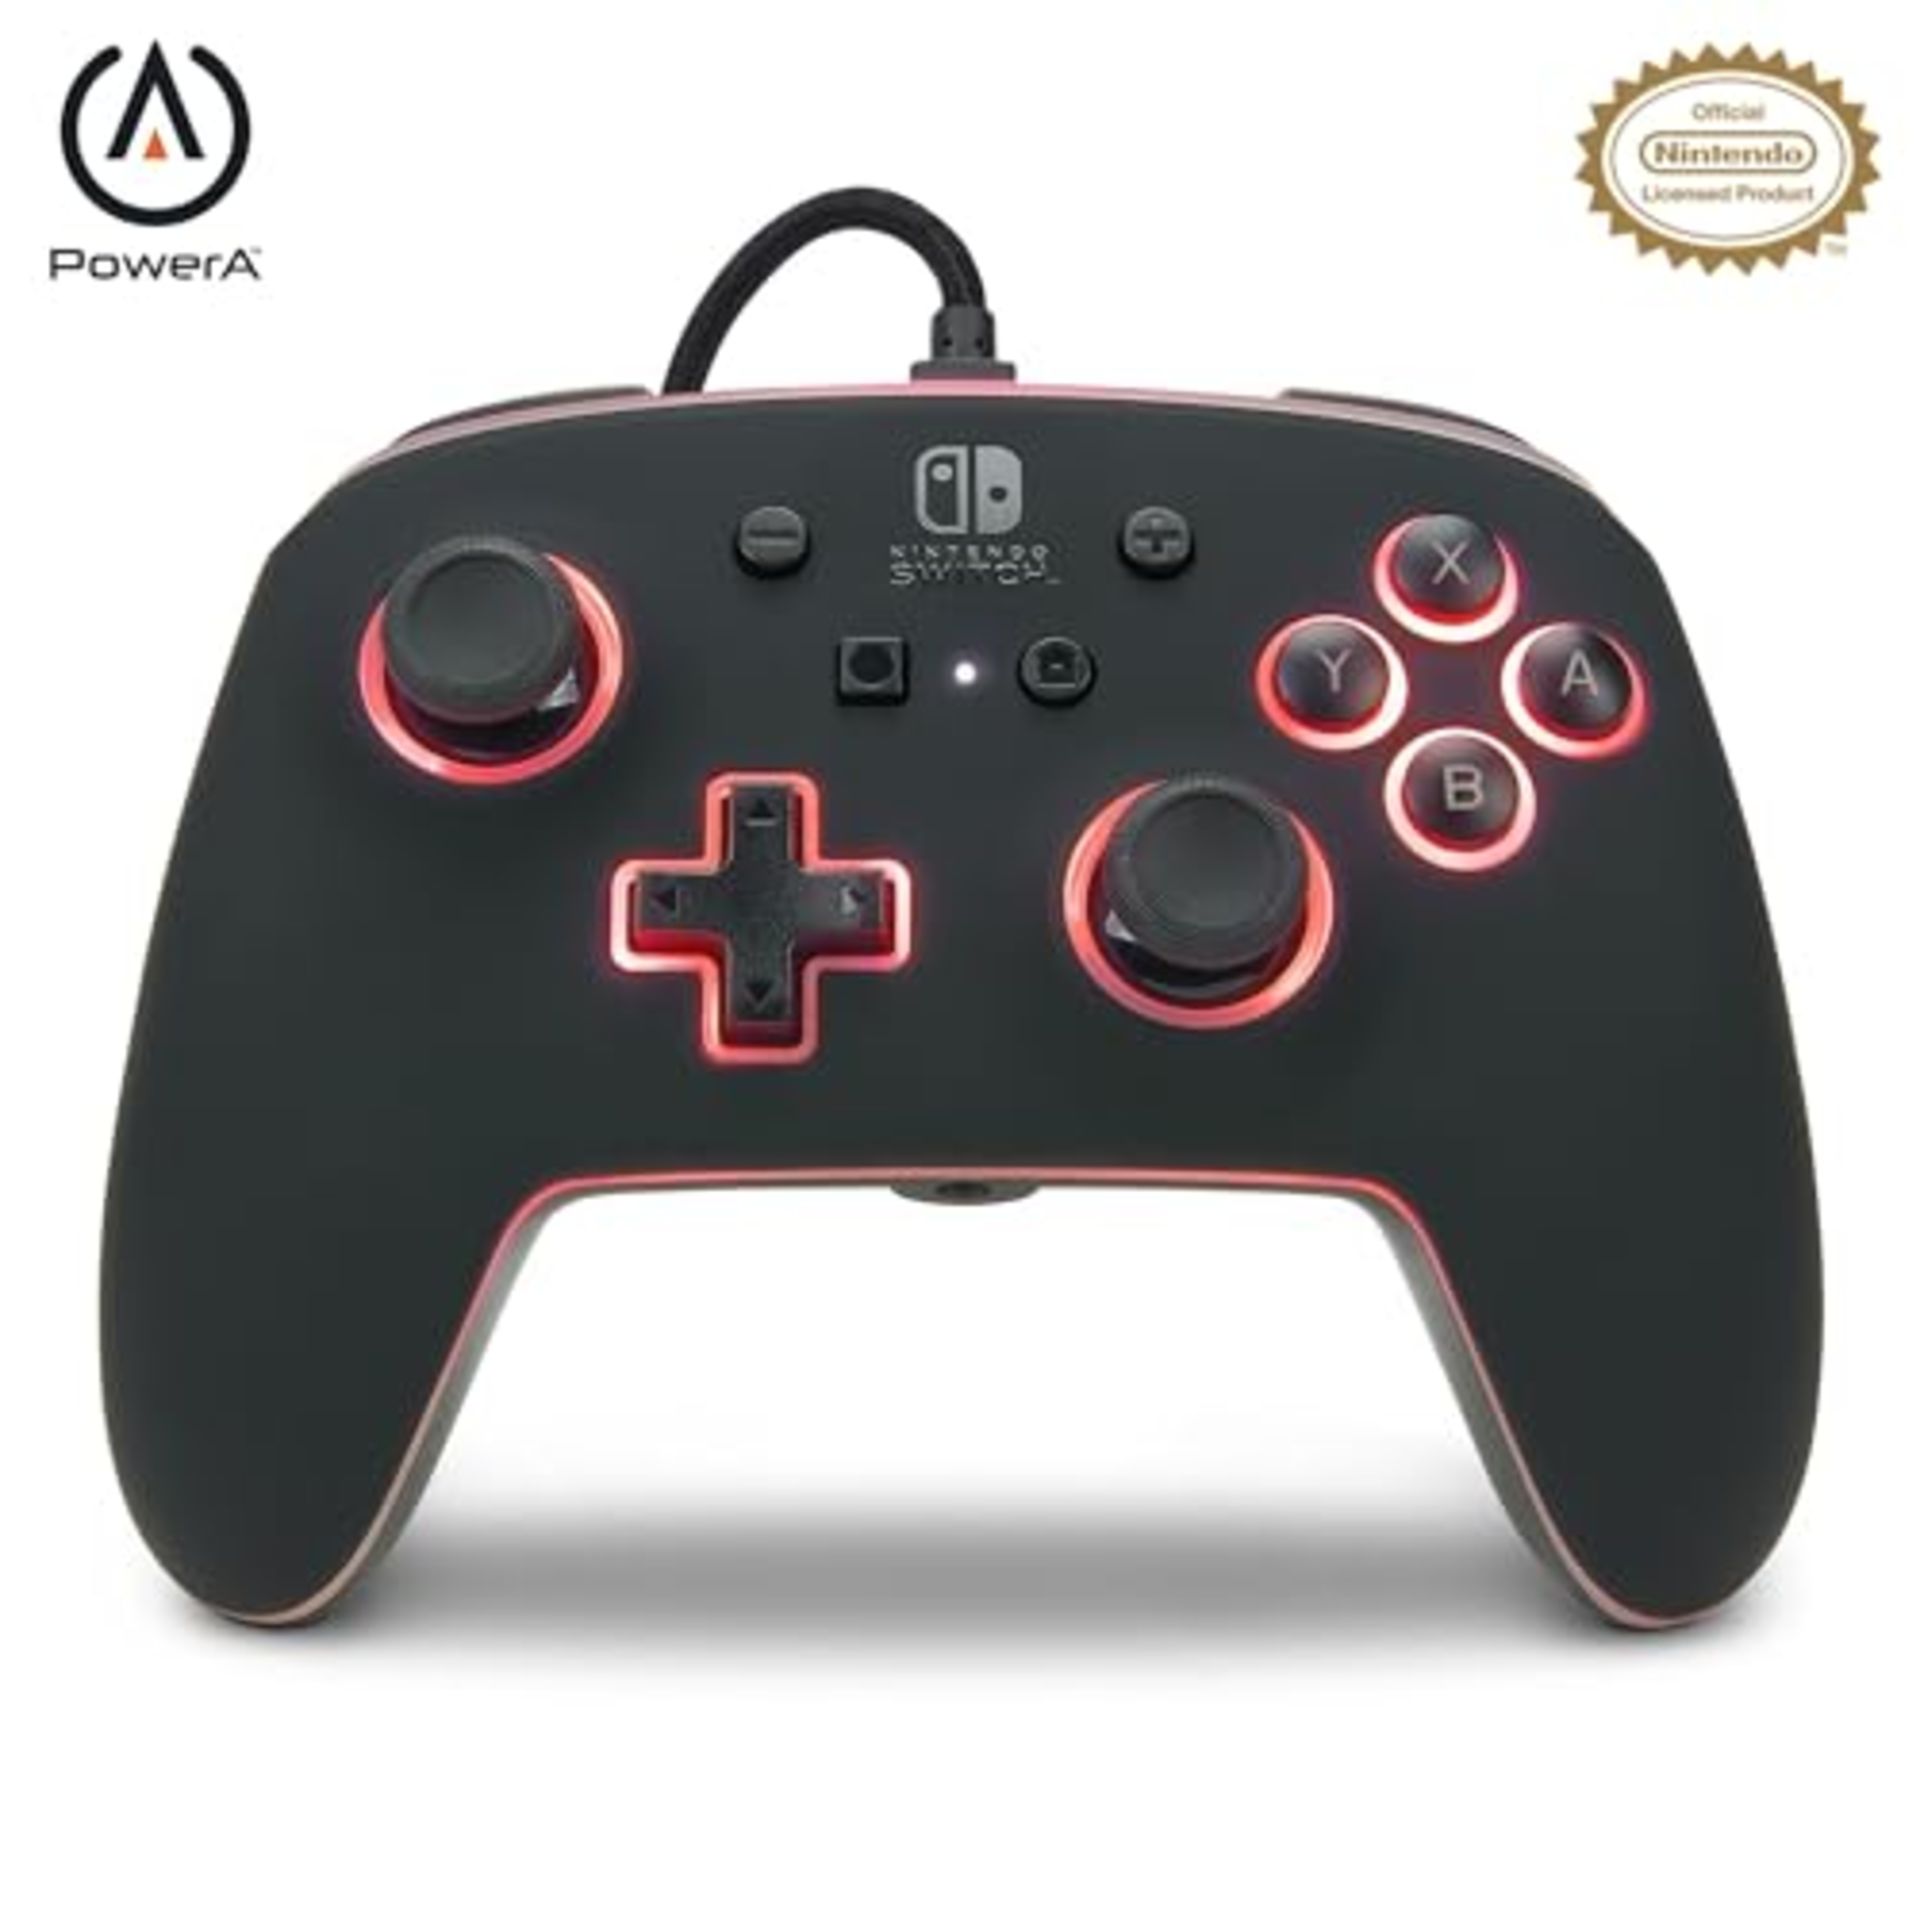 PowerA Advanced Wired Controller Spectra for Nintendo Switch - Nintendo Switch